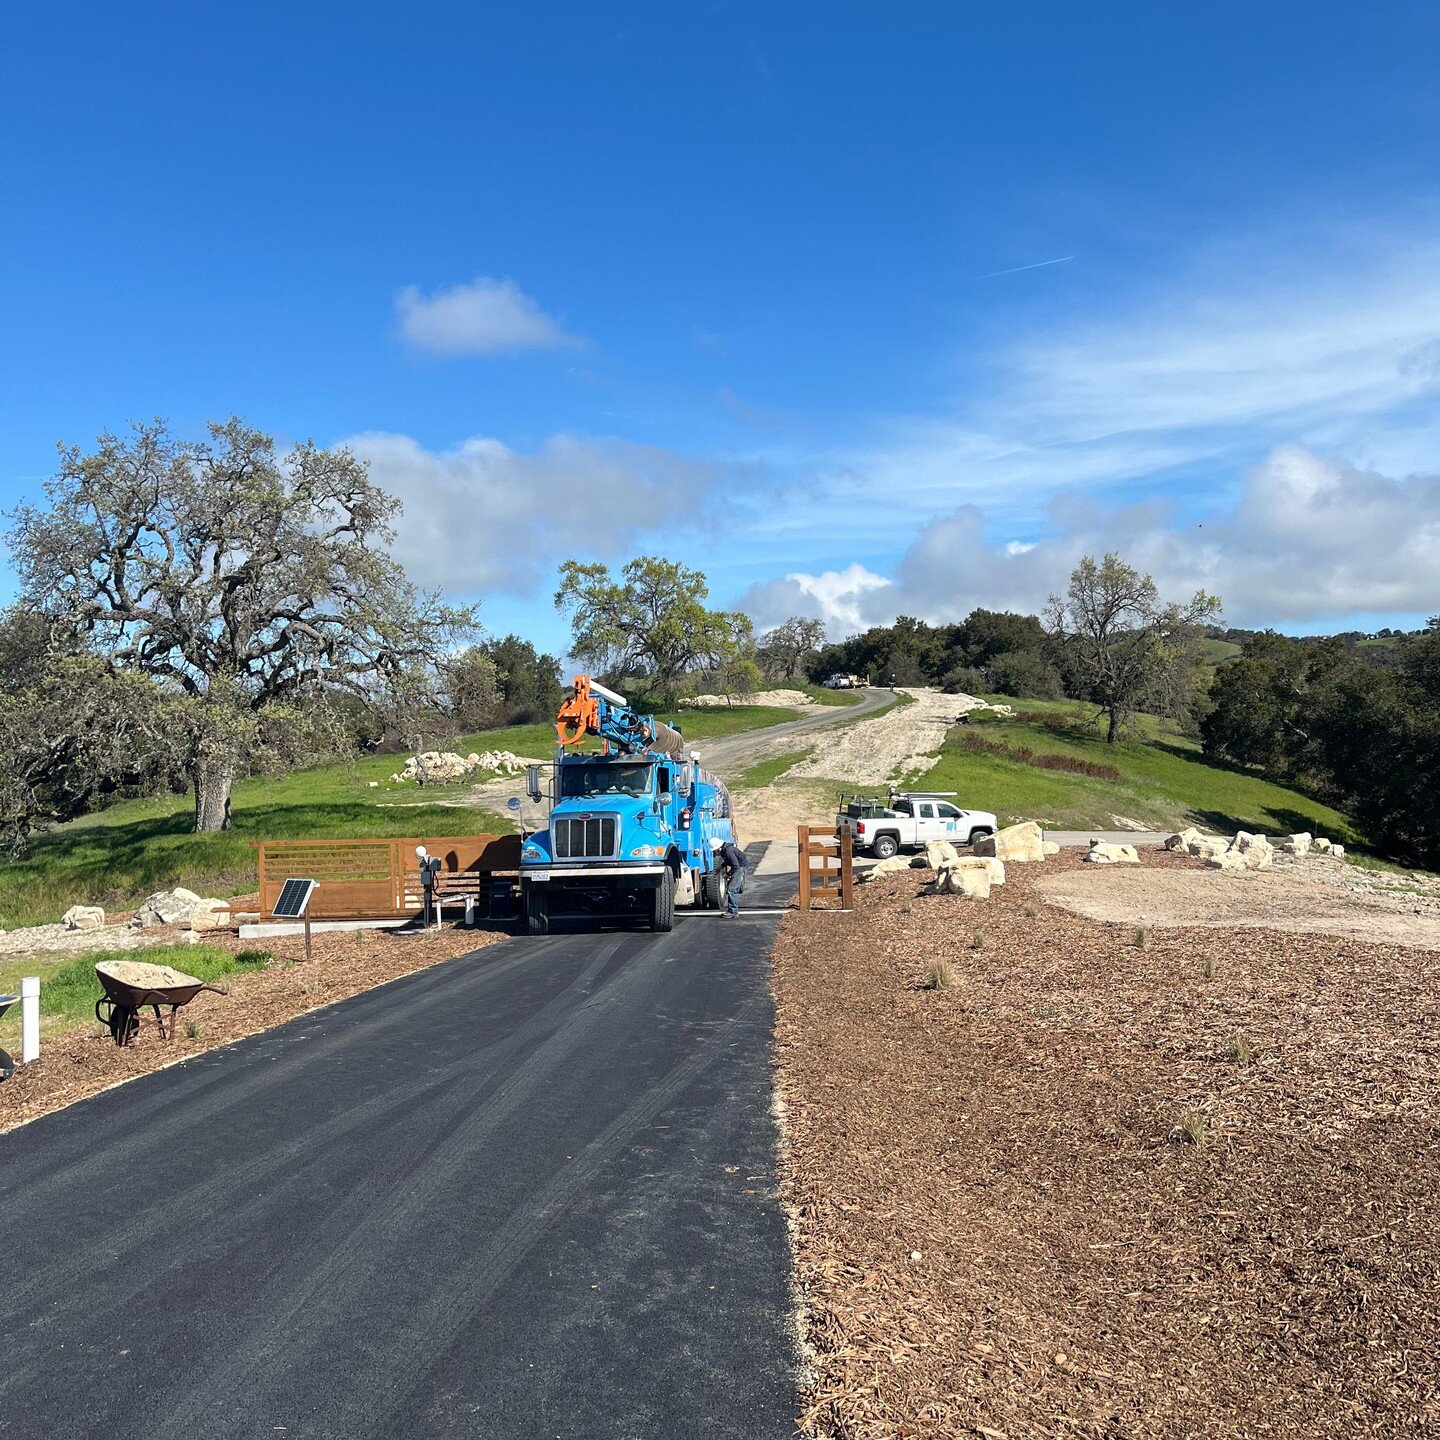 At long last our Peachy Canyon Residence project is getting power! We're very excited for our clients who have been waiting patiently for months for PG&amp;E to arrive. This means we can now schedule a date for our open house/tour of this amazing hom